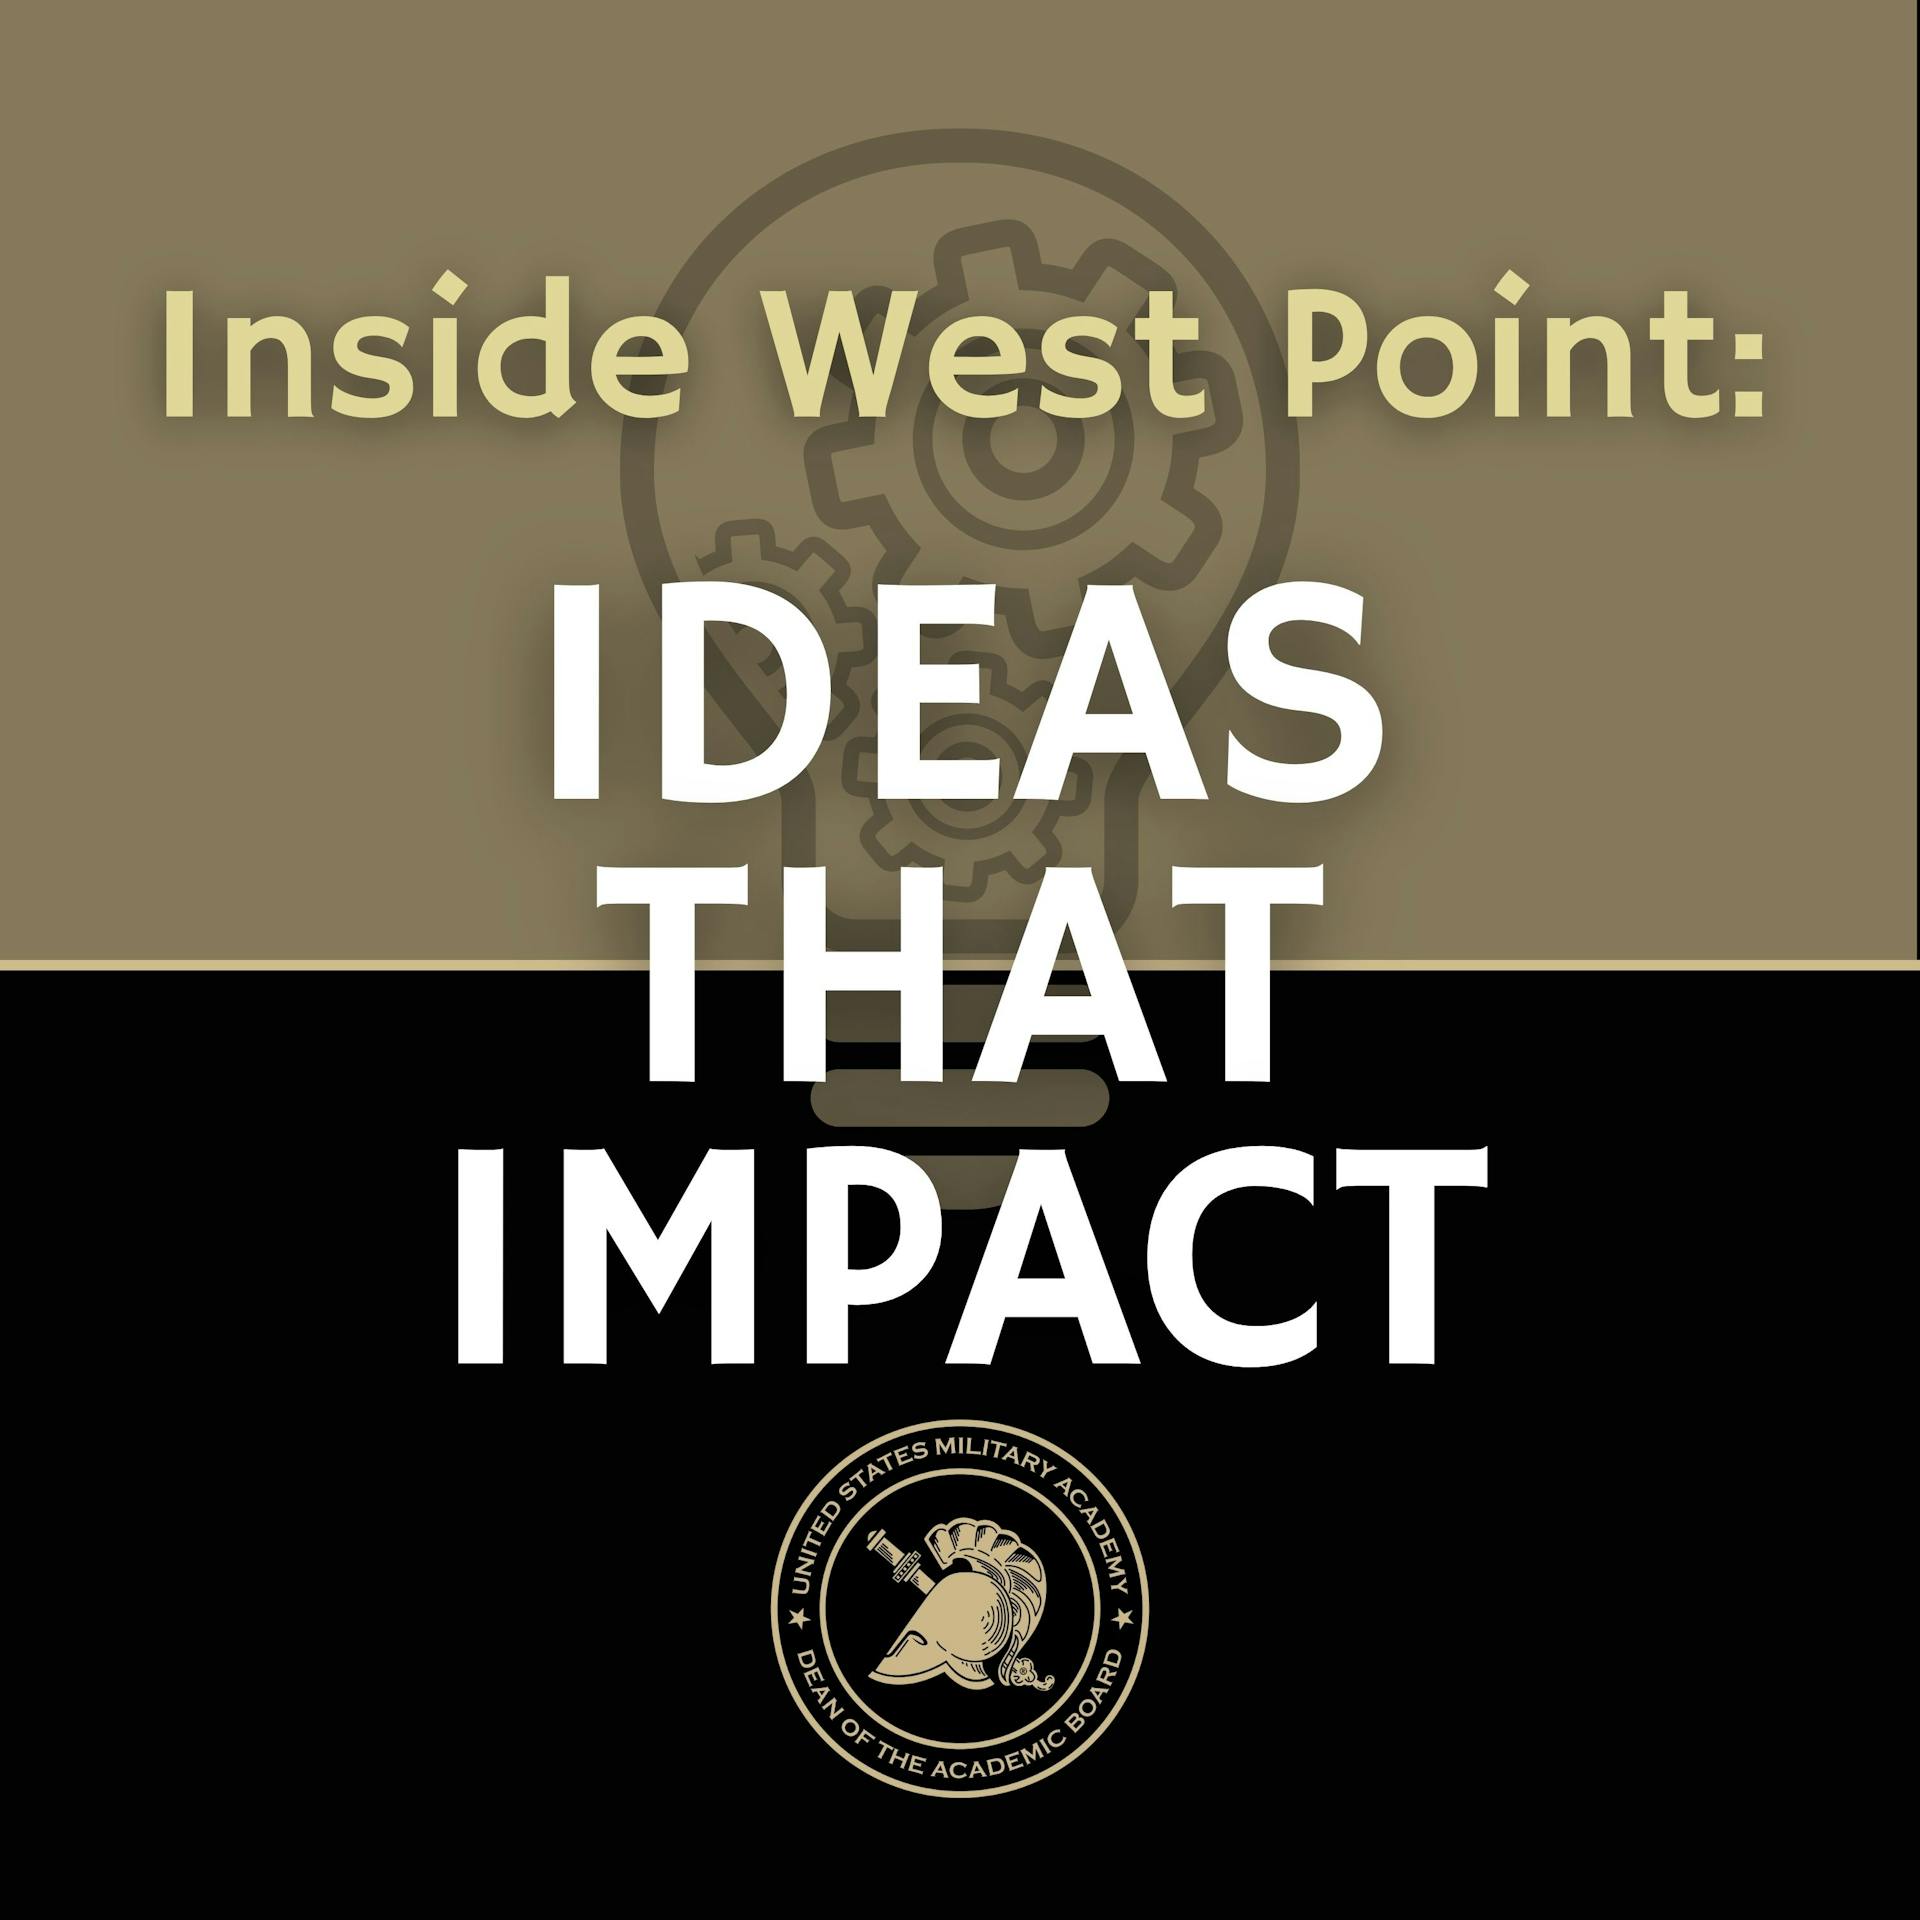 Review: Inside West Point: Ideas That Impact